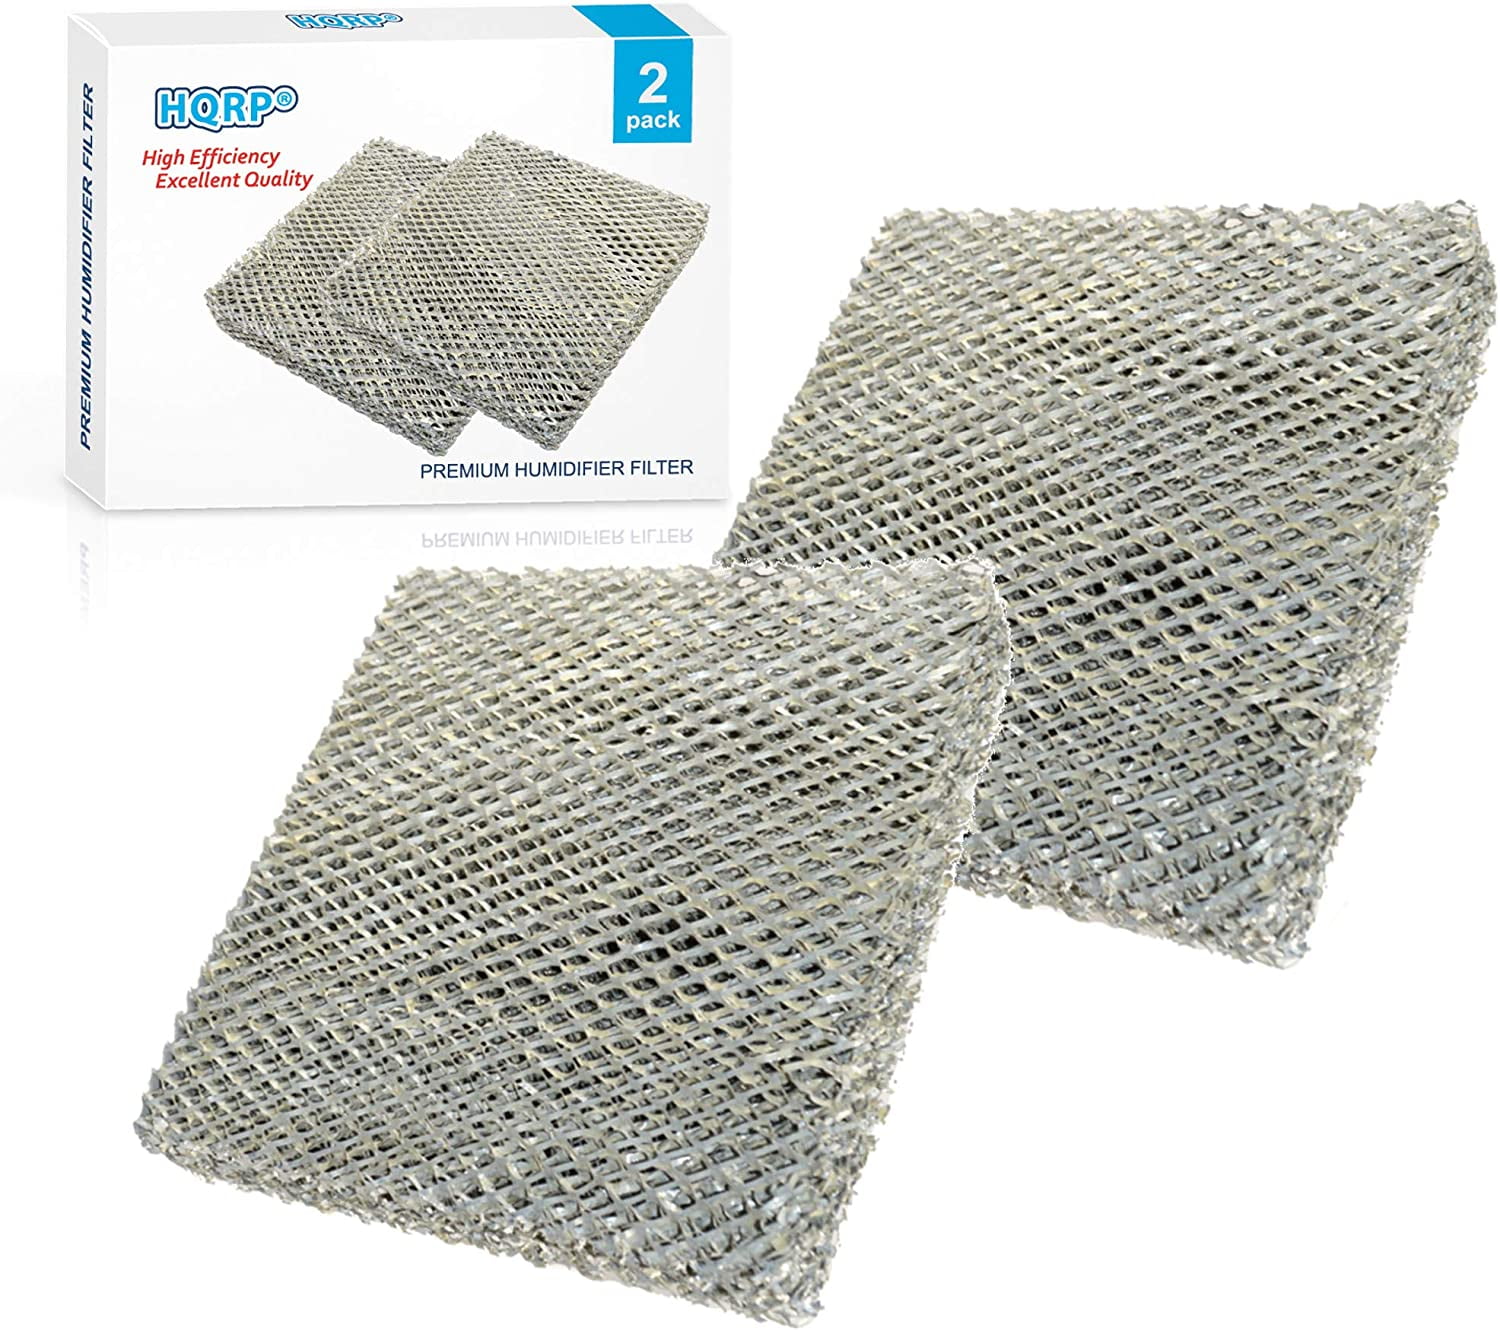 600 700 A35PR Metal Humidifier Pad Replacement for Aprilaire 35 760-3-PACK 